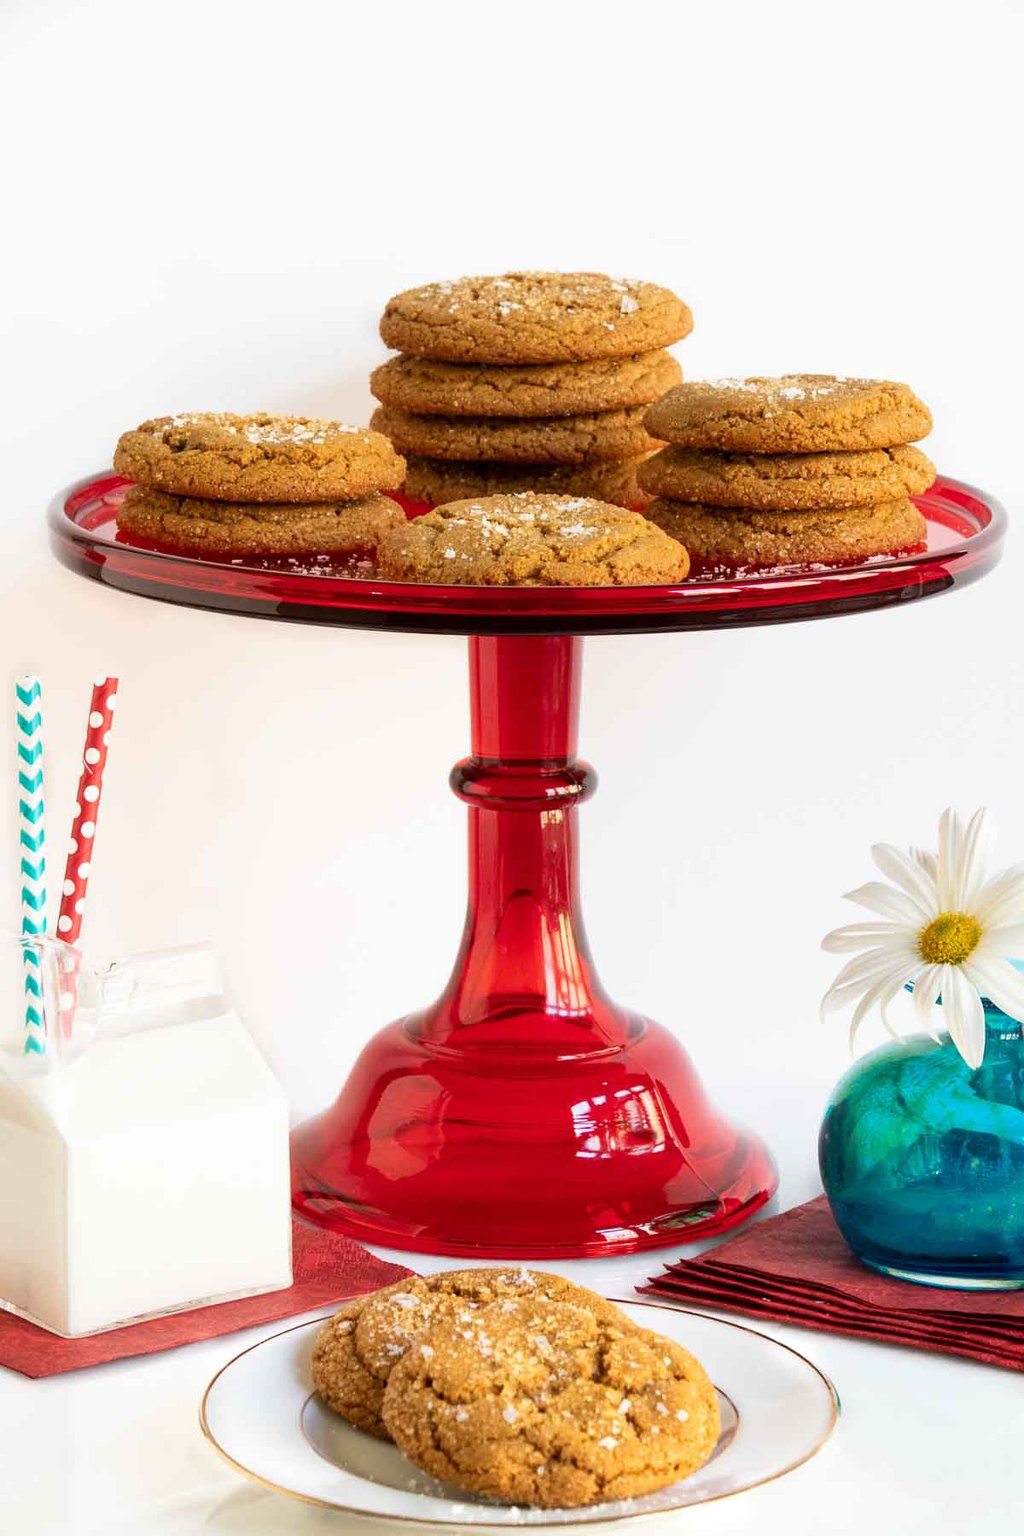 Vertical photo of Crinkly Crackly Butterscotch Cookies on a red glass pedestal plate with a glass carton of milk and cookies in the foreground.